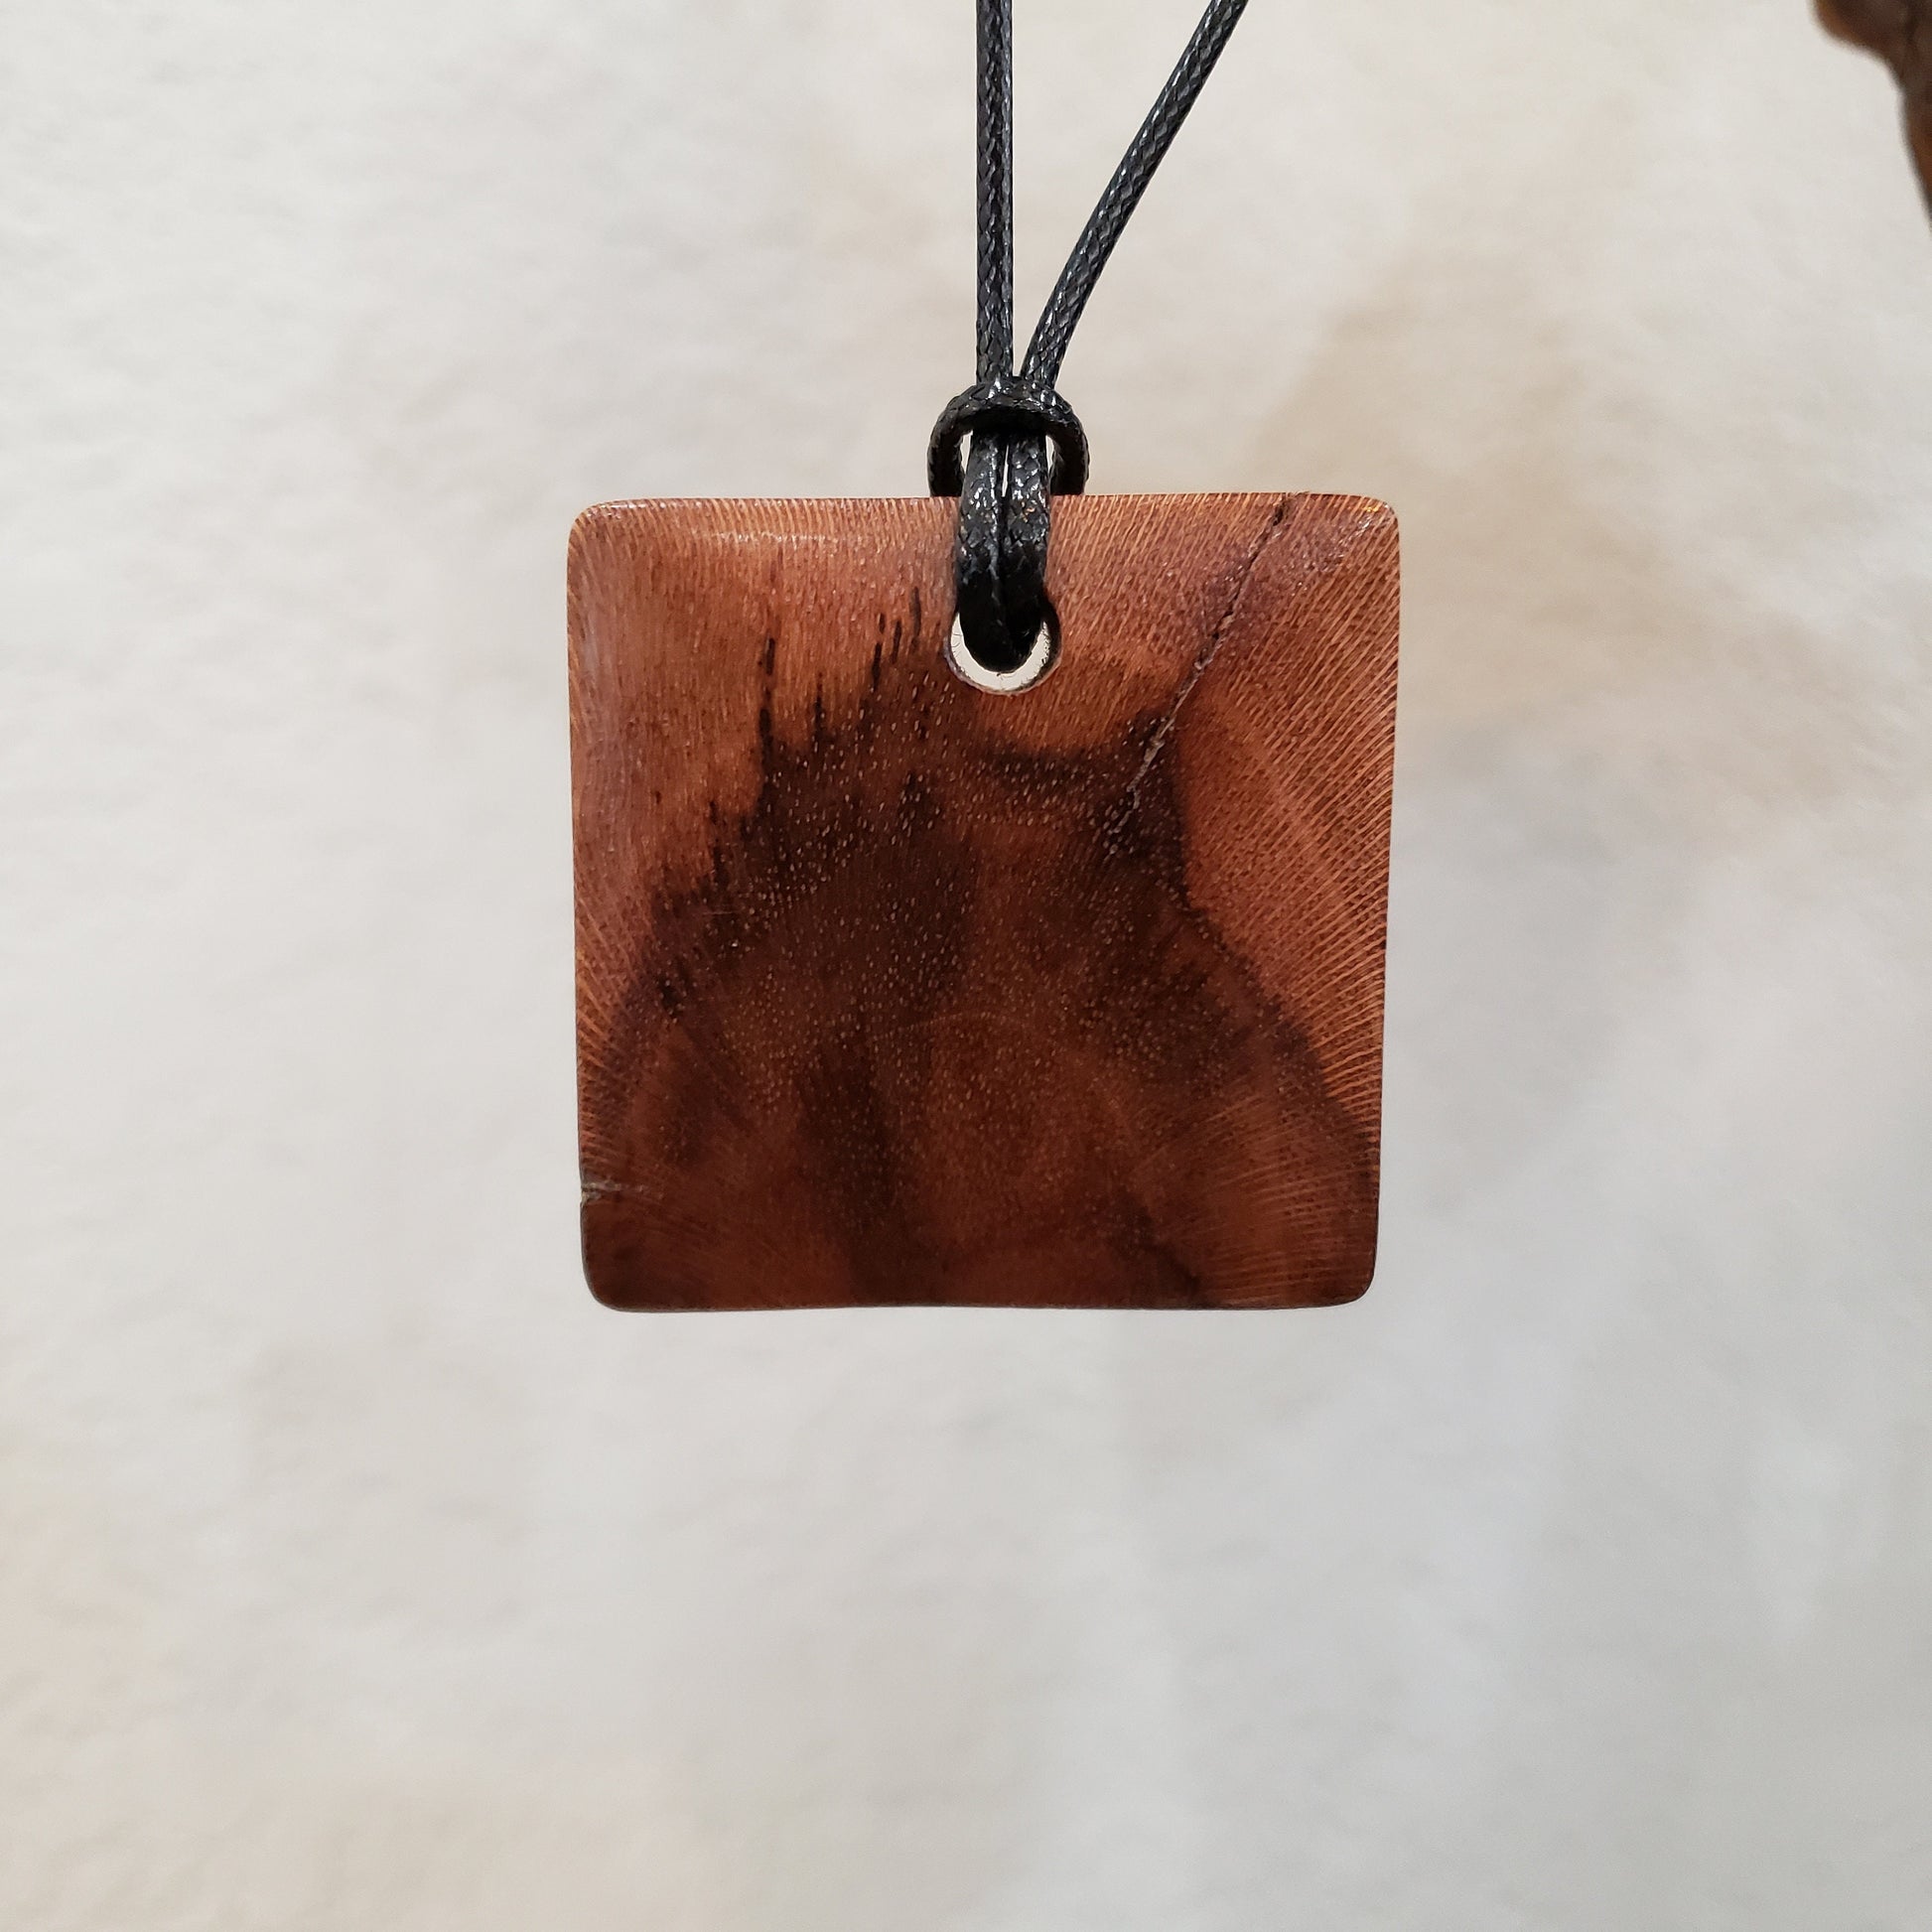 Grapevine Pendant Made from retired California grape vines 100121-40. 100% Recycled!